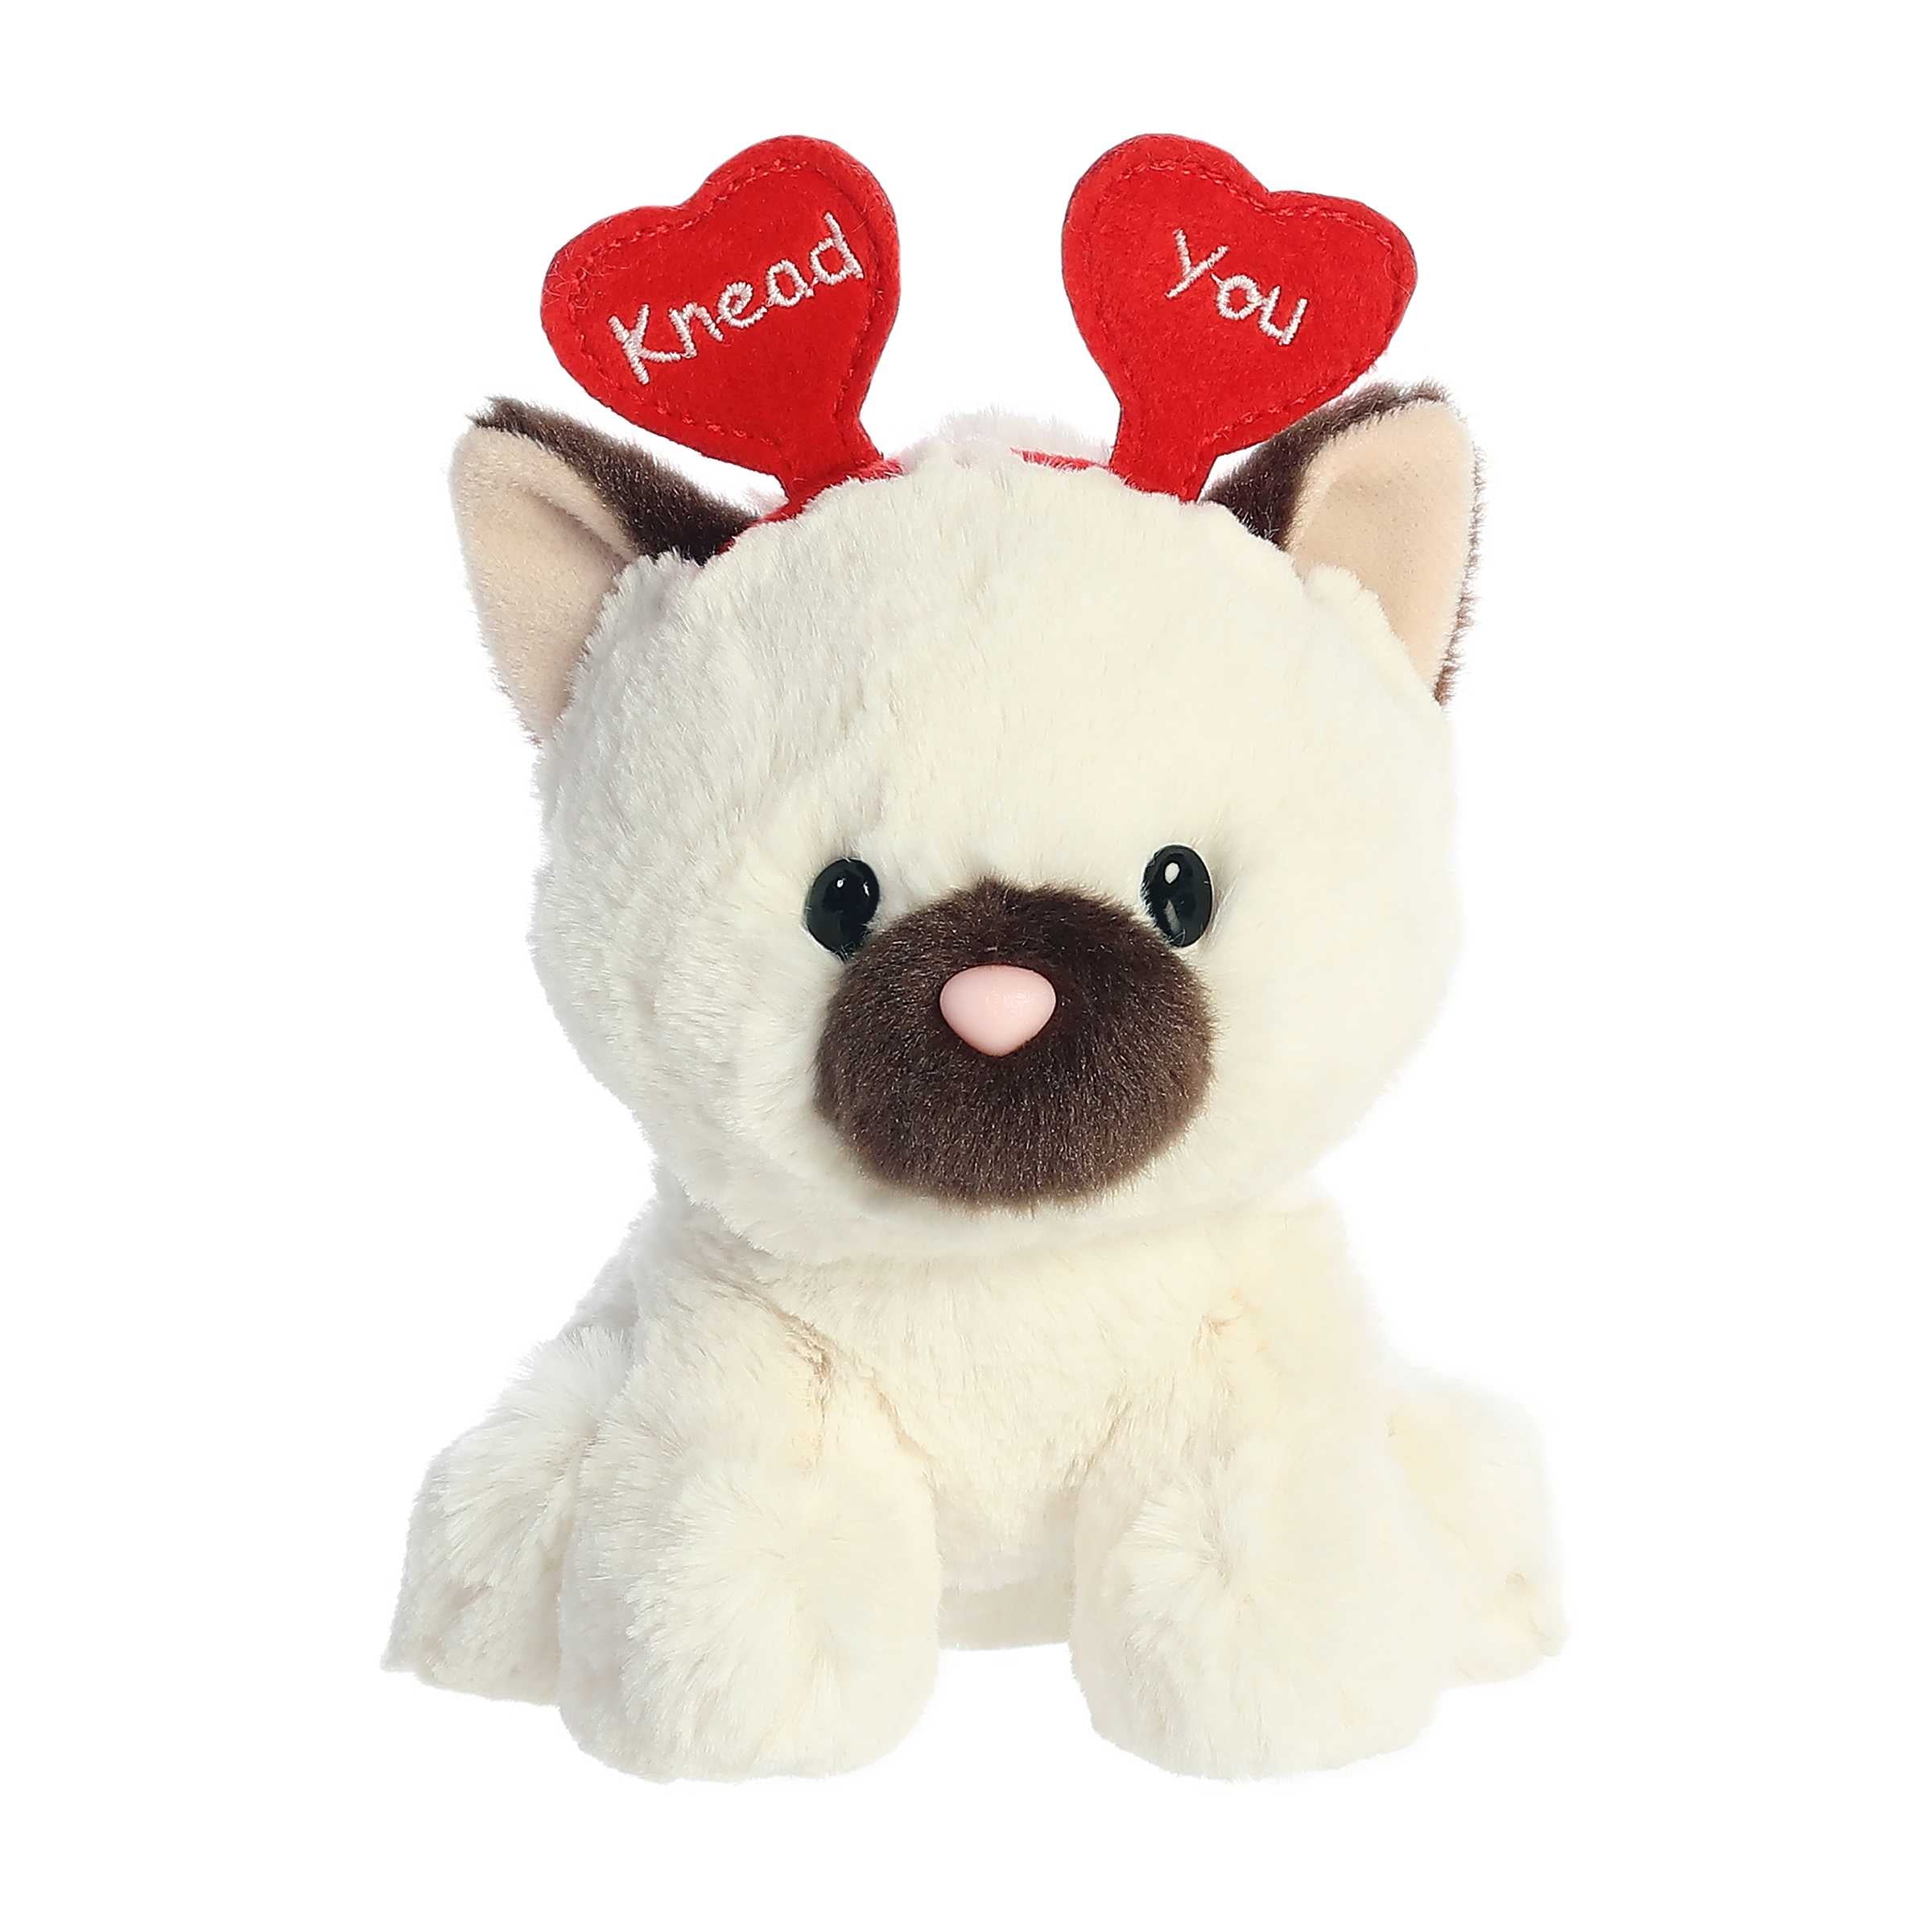 Siamese Cat plush from Love On The Mind, with 'Knead You' headband, showcasing affectionate charm for Valentine's Day.